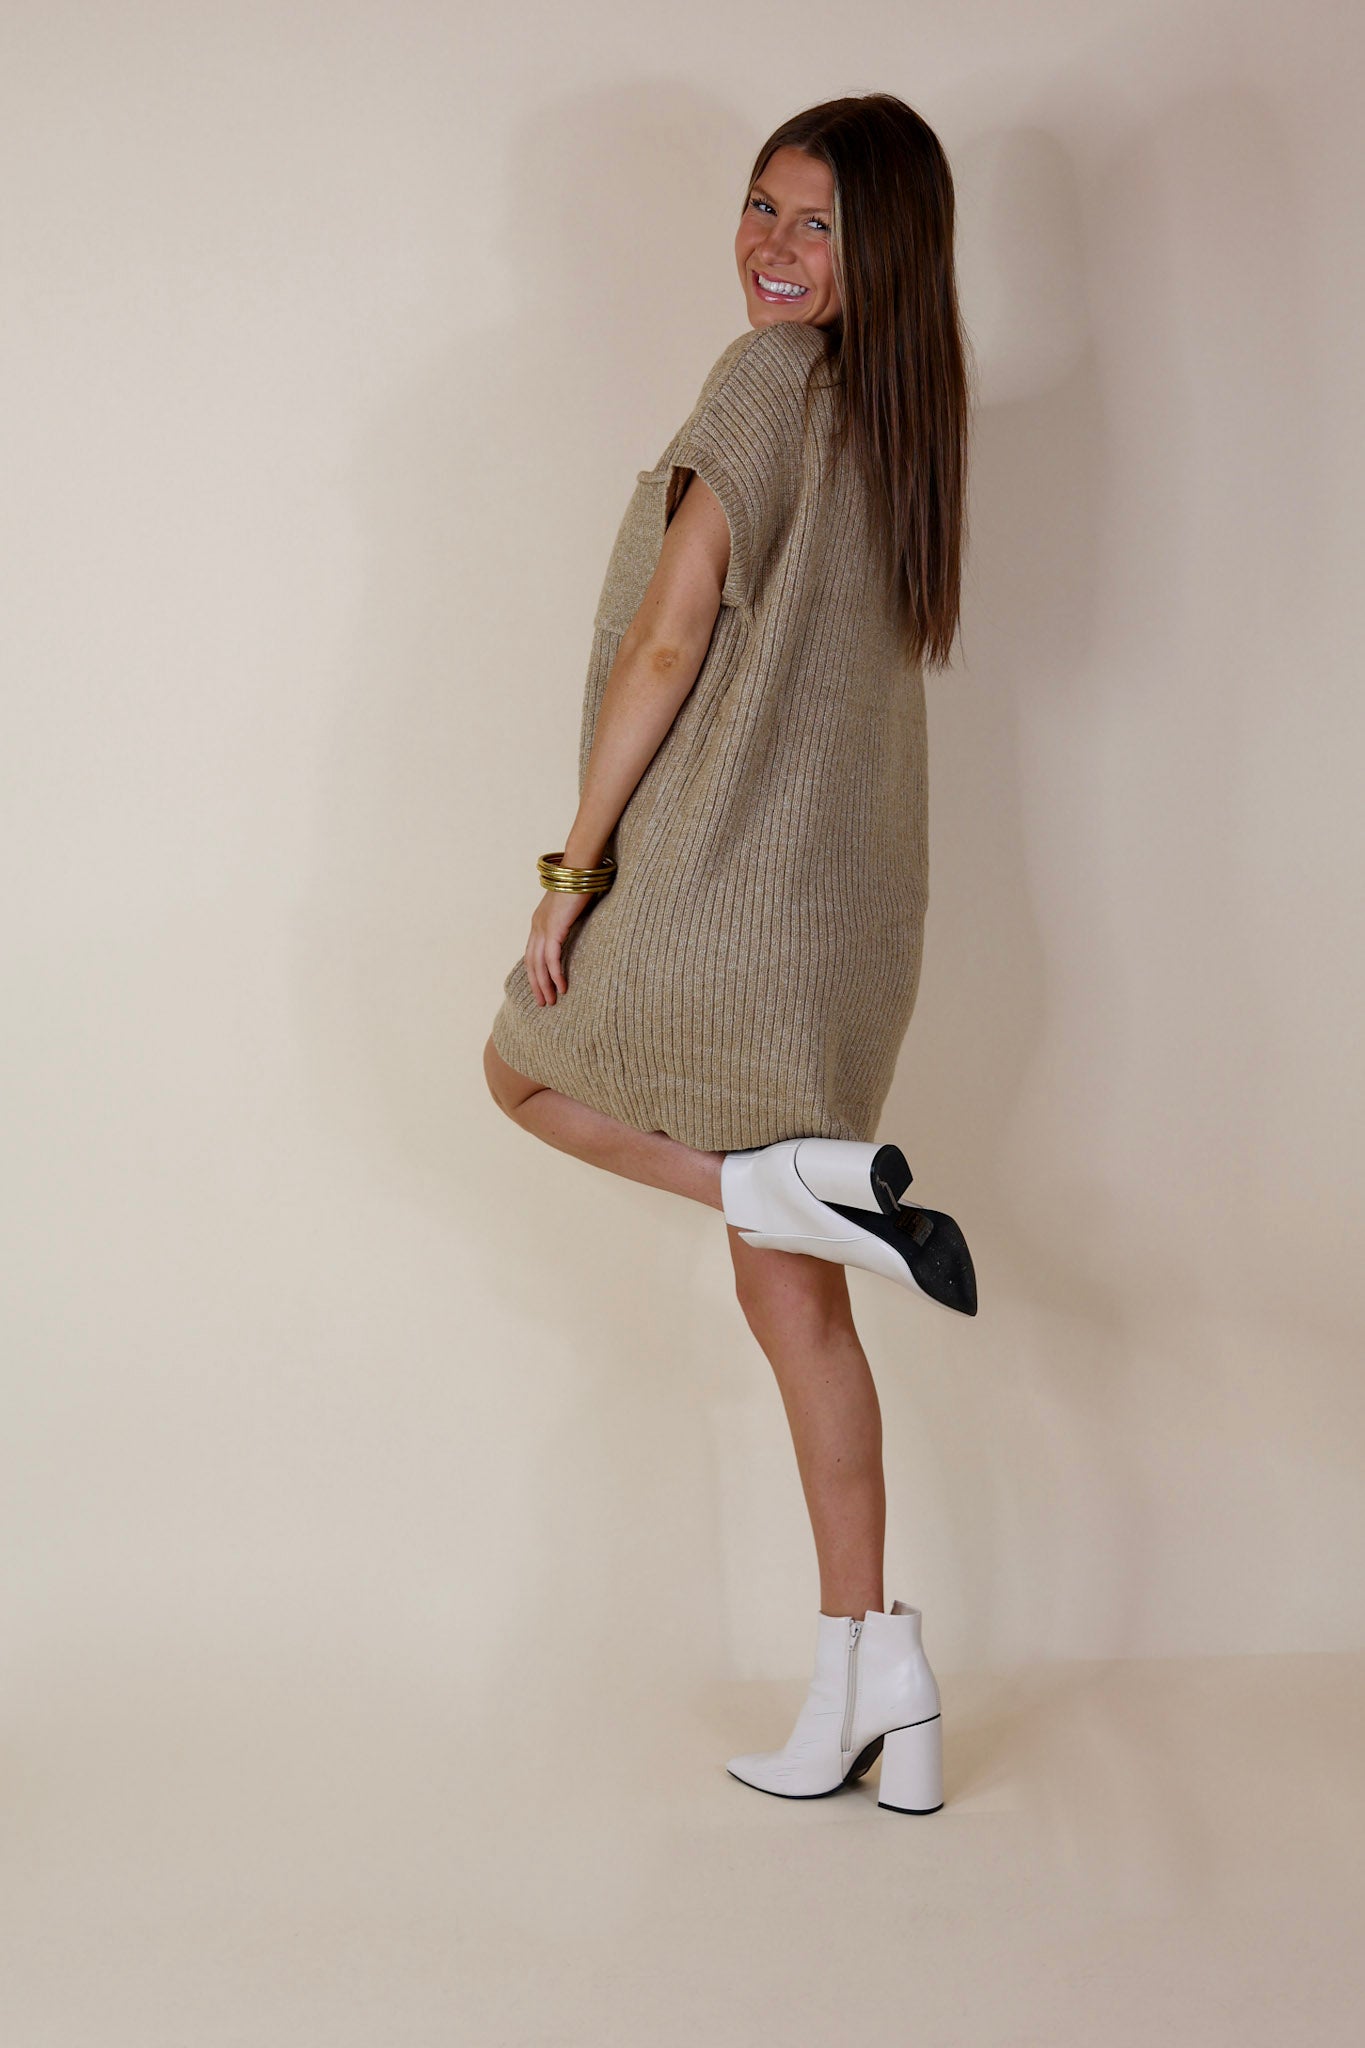 City Sights Cap Sleeve Sweater Dress in Oatmeal Beige - Giddy Up Glamour Boutique